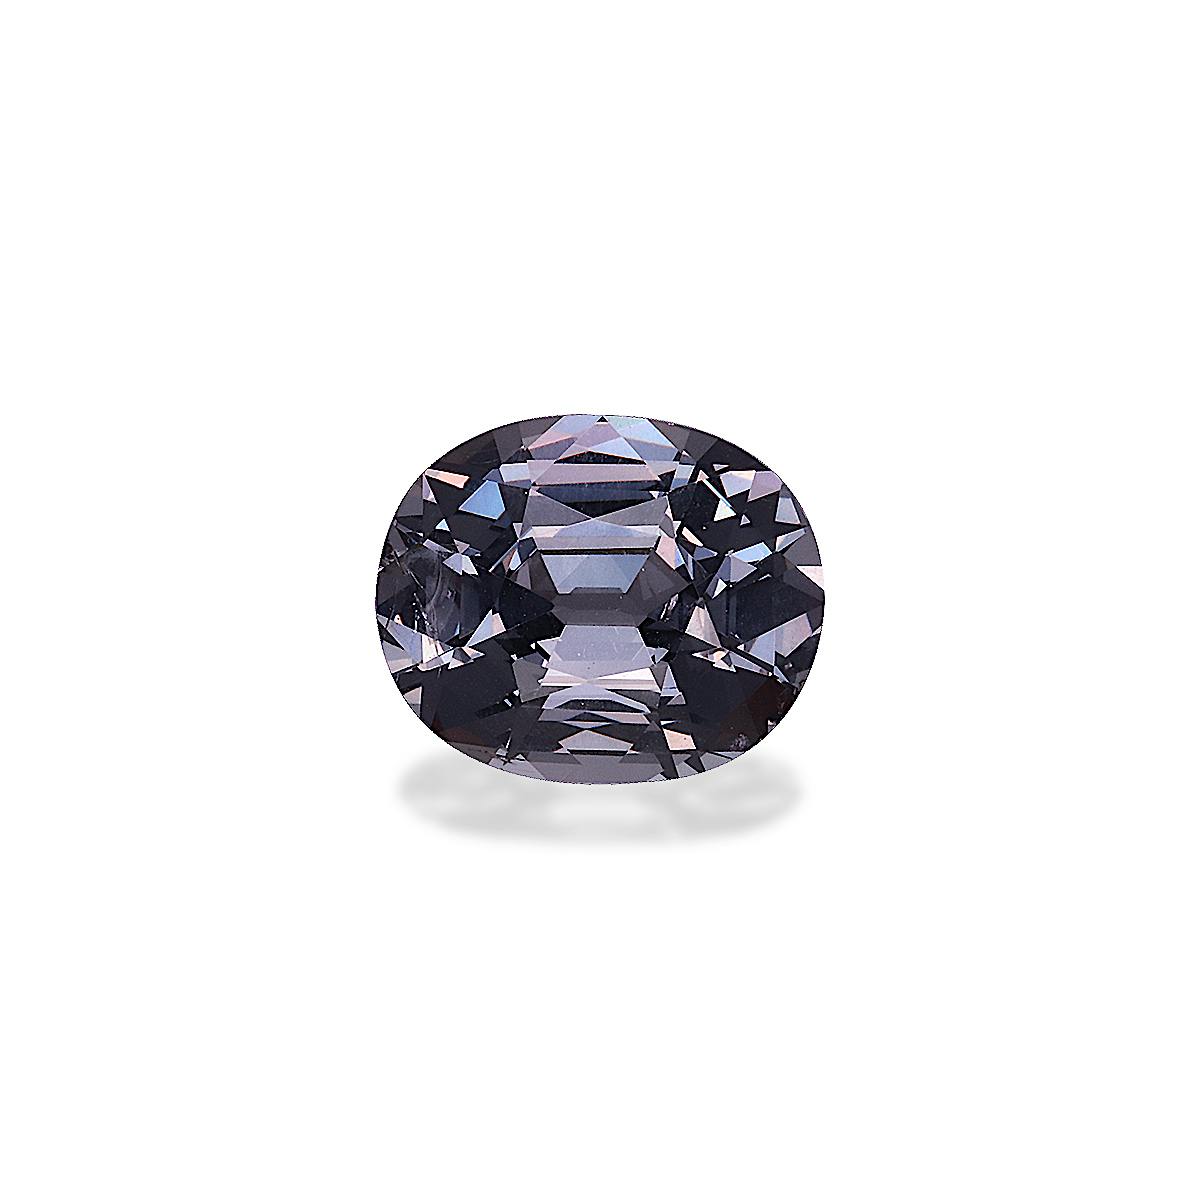 Grey Spinel 3.08ct - Main Image